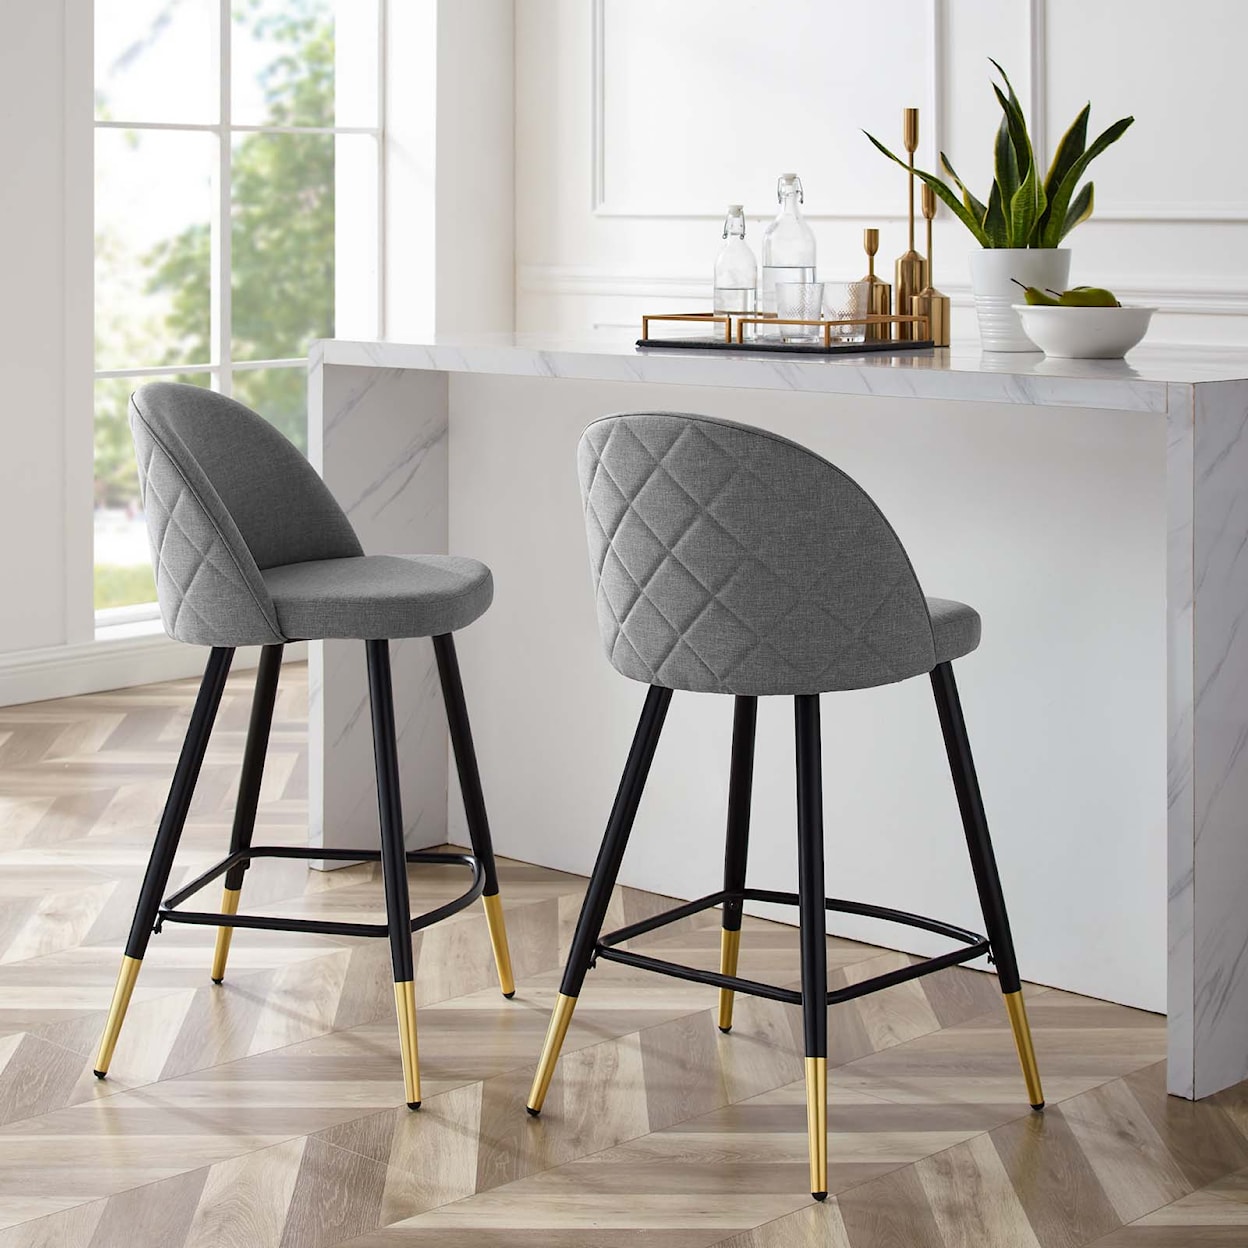 Modway Cordial Counter Stools